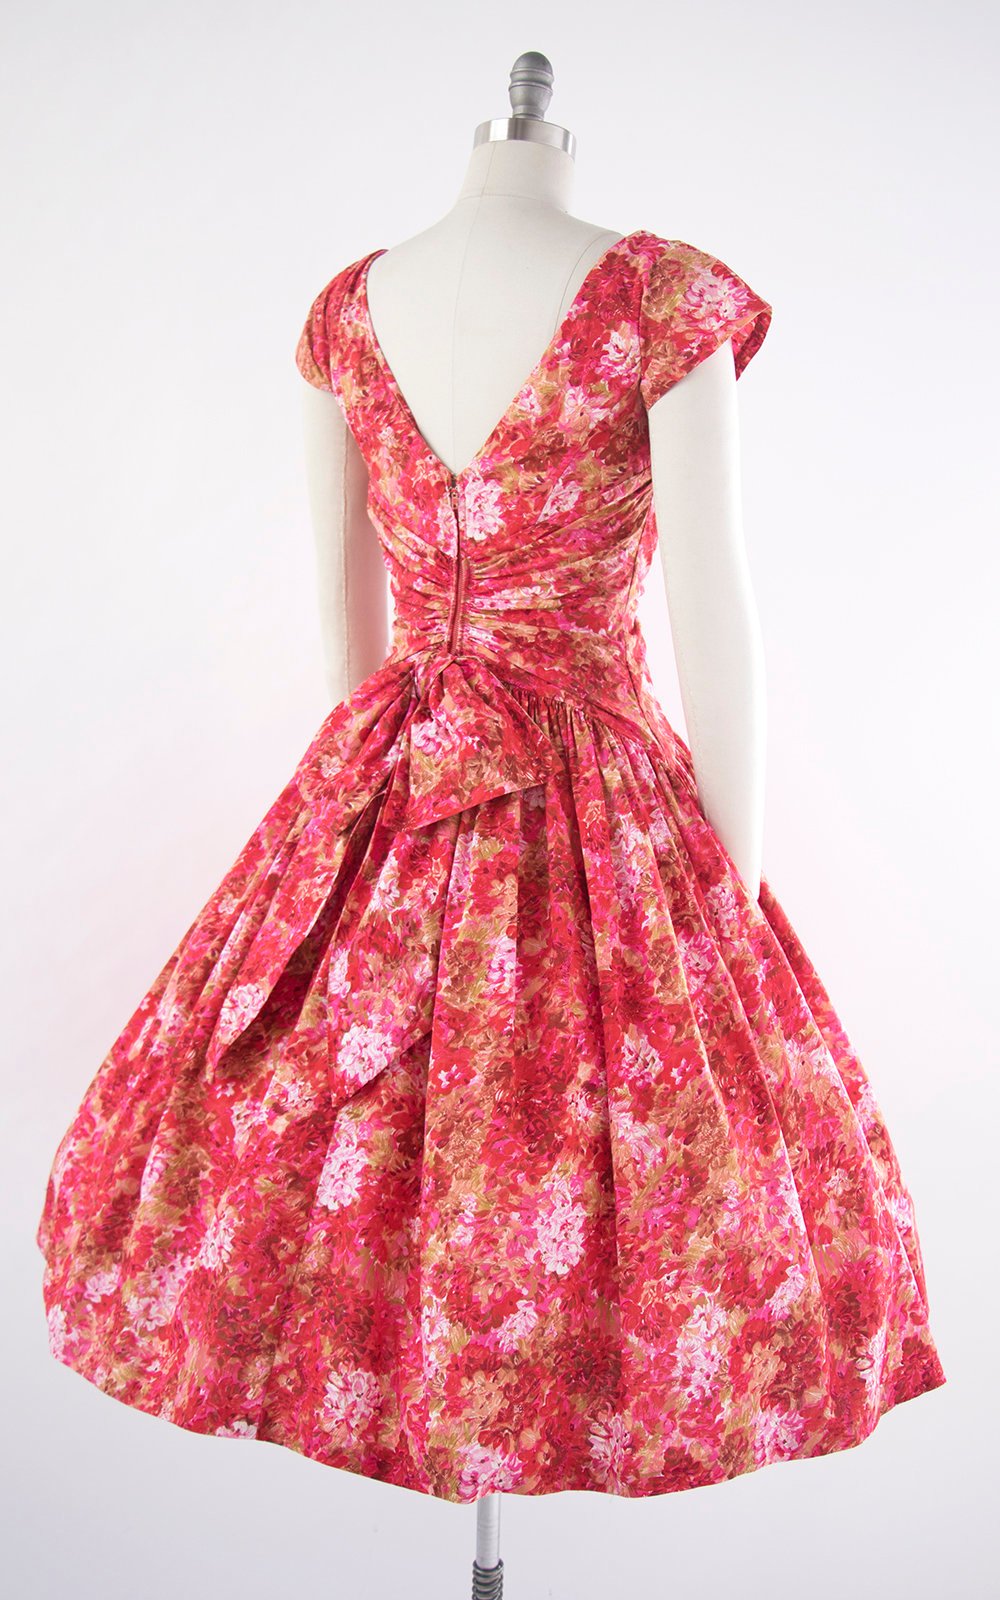 Vintage 1950s Dress | 50s Floral Cotton Pink Full Skirt Pleated Drop Waist Bow Party Dress (medium)